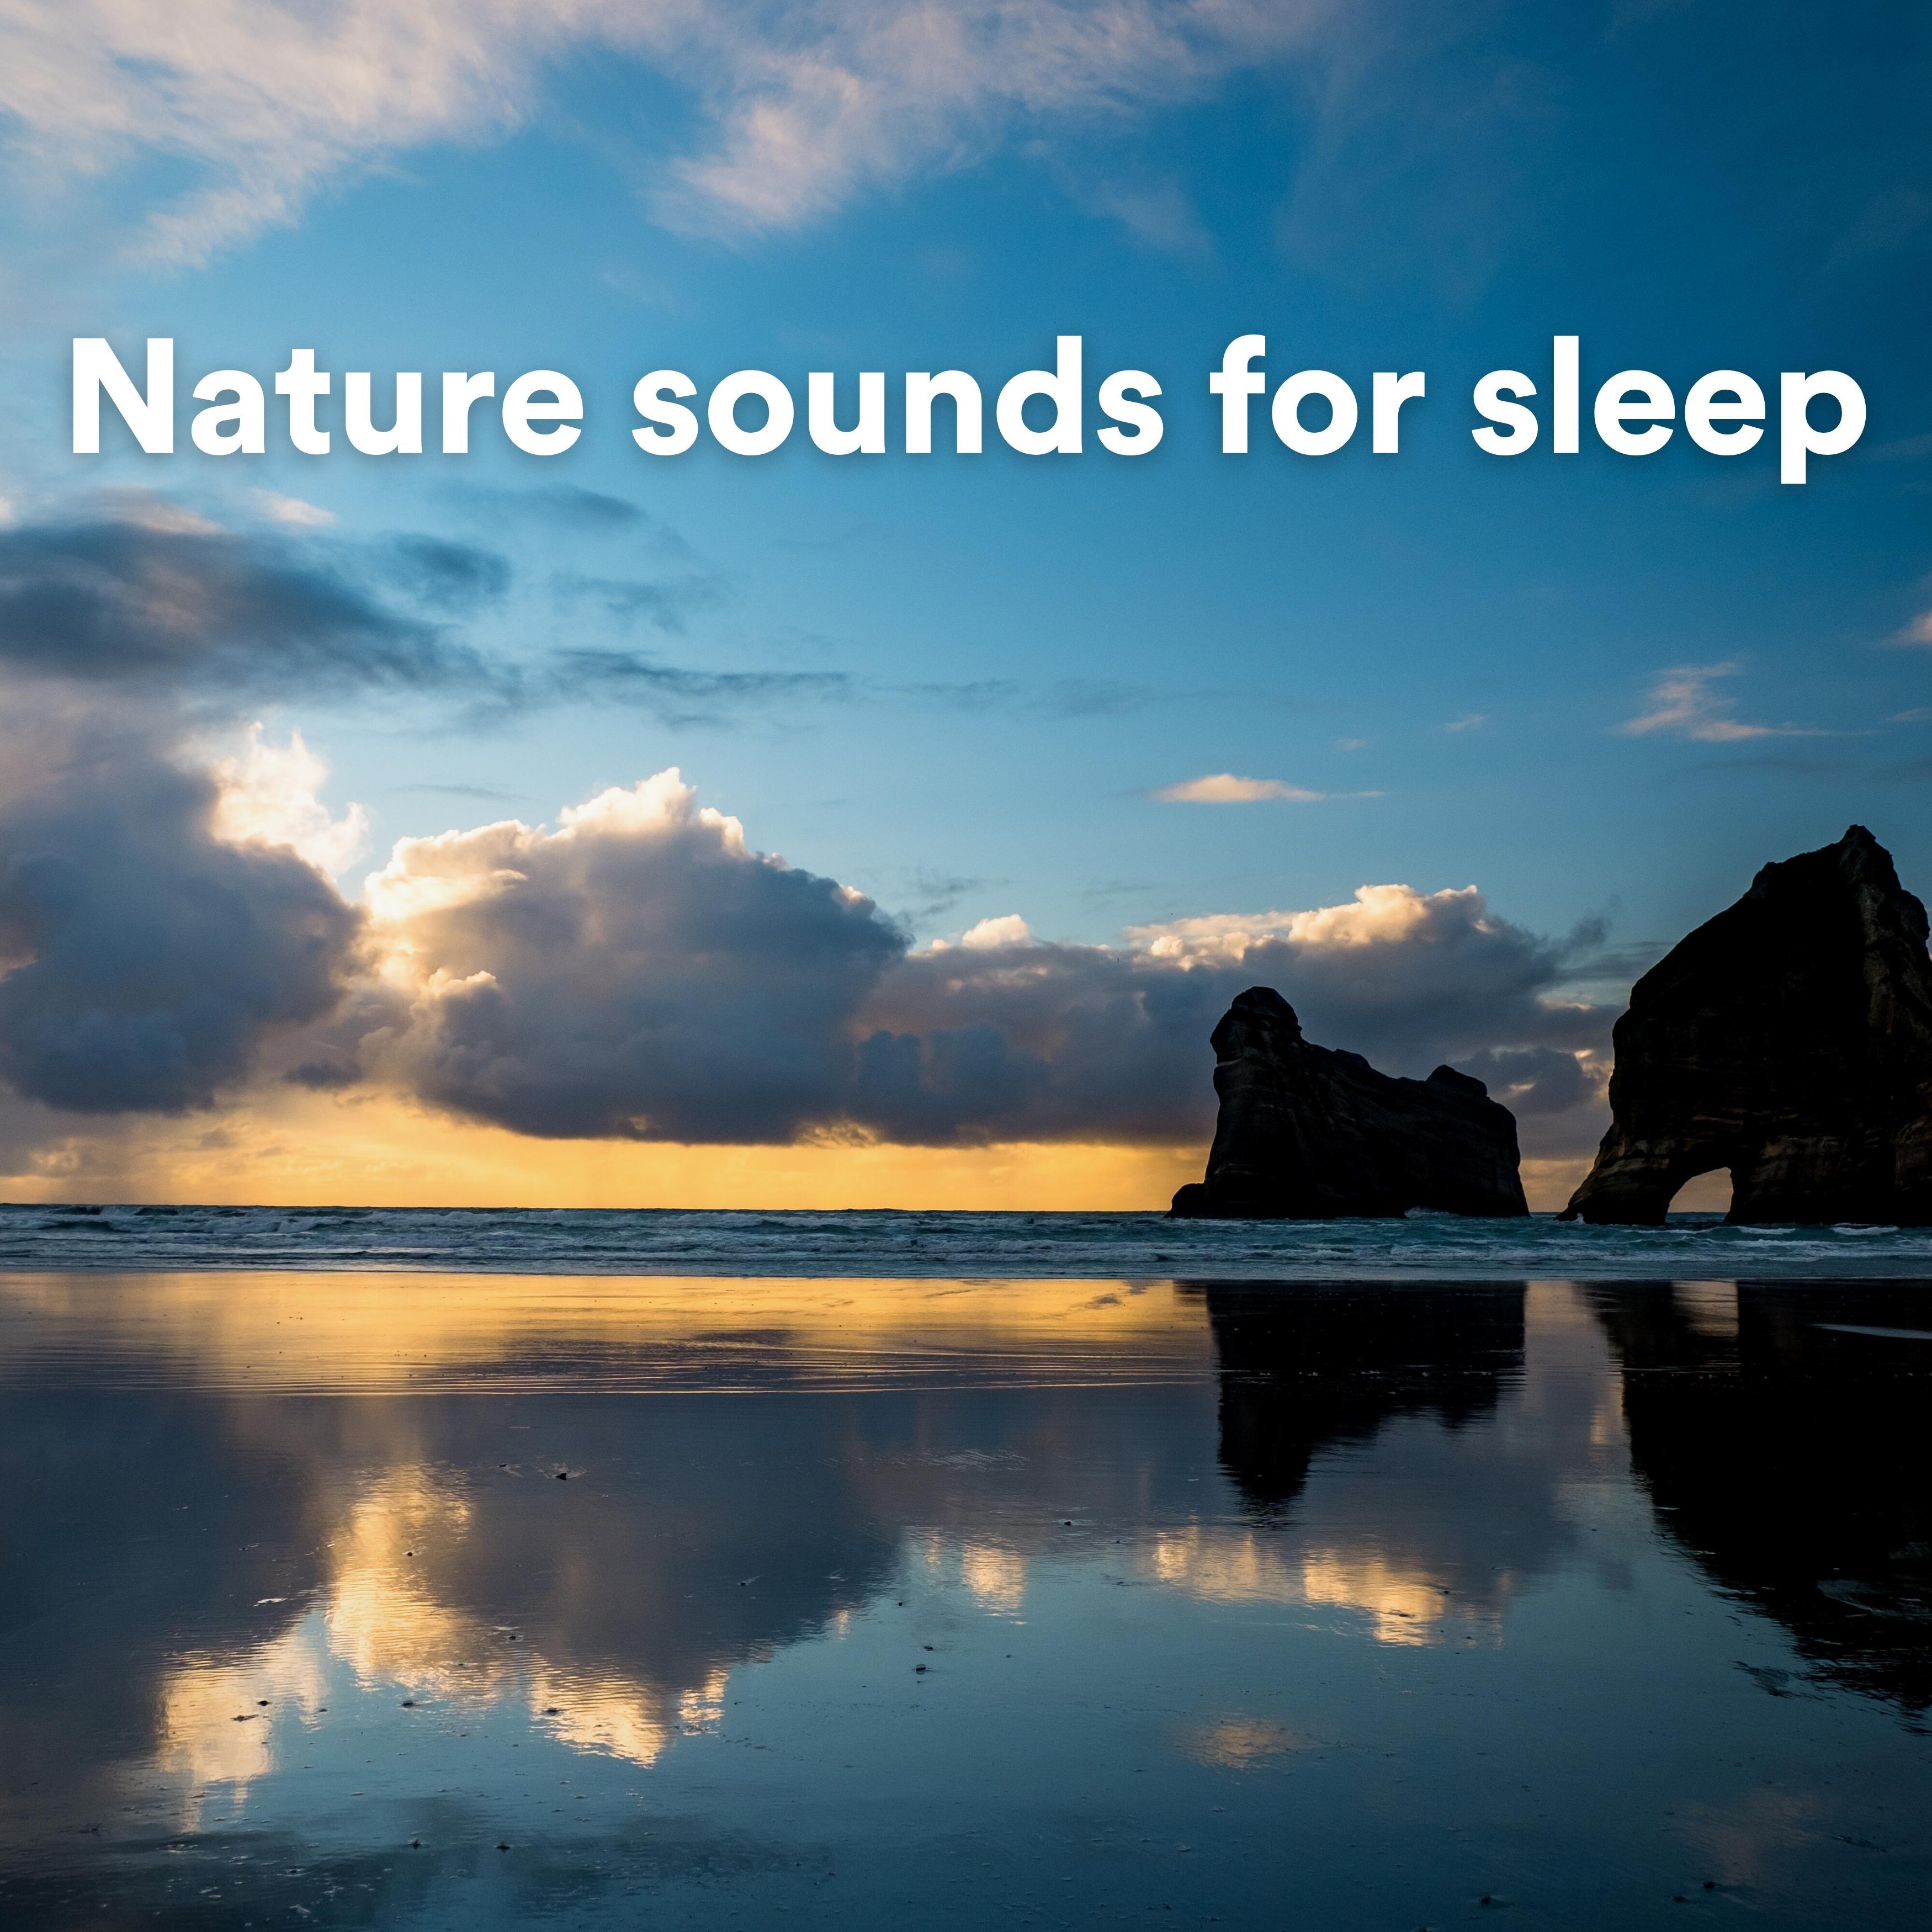 Nature Sound Series - Nature sounds for sleep, Pt. 15